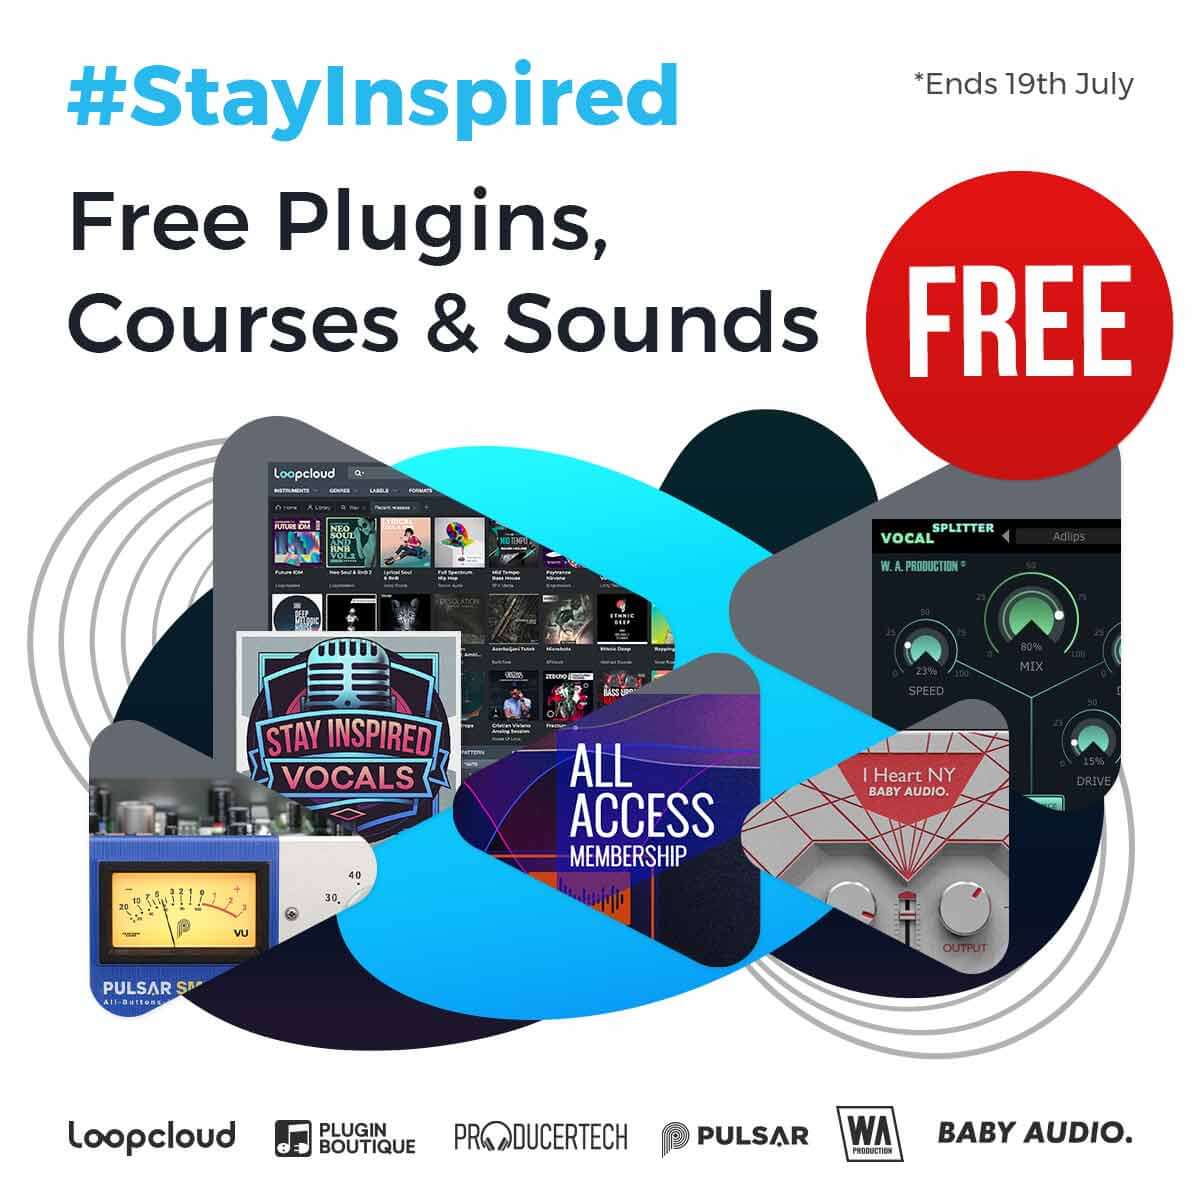 Loopmasters & Producertech Massive (Plugin, Courses & Sounds) Giveaway